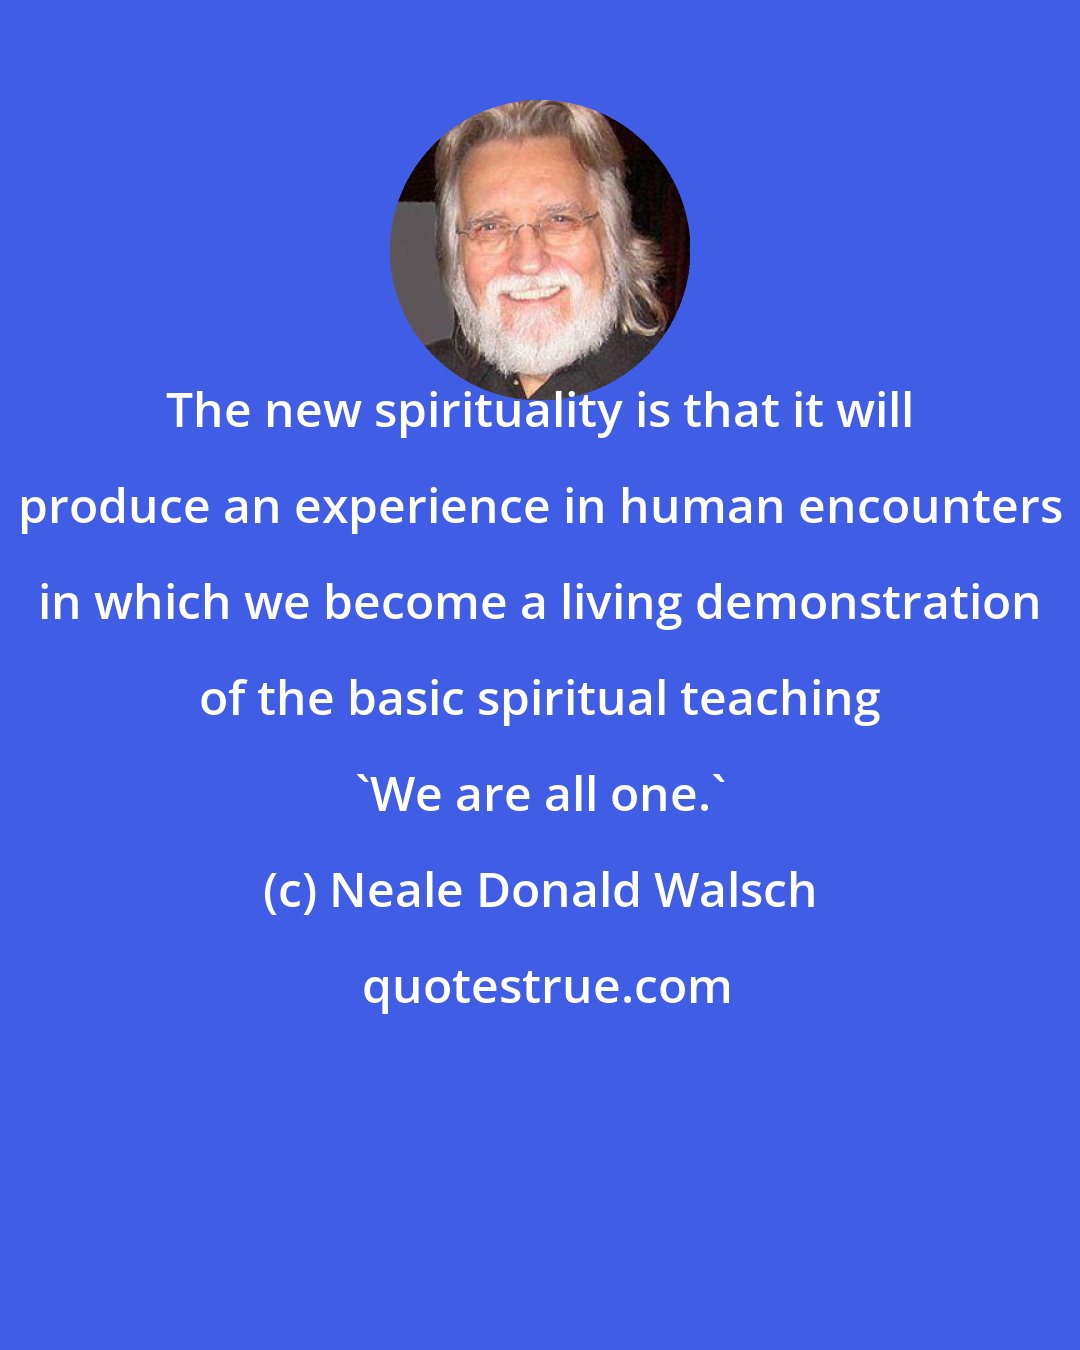 Neale Donald Walsch: The new spirituality is that it will produce an experience in human encounters in which we become a living demonstration of the basic spiritual teaching 'We are all one.'